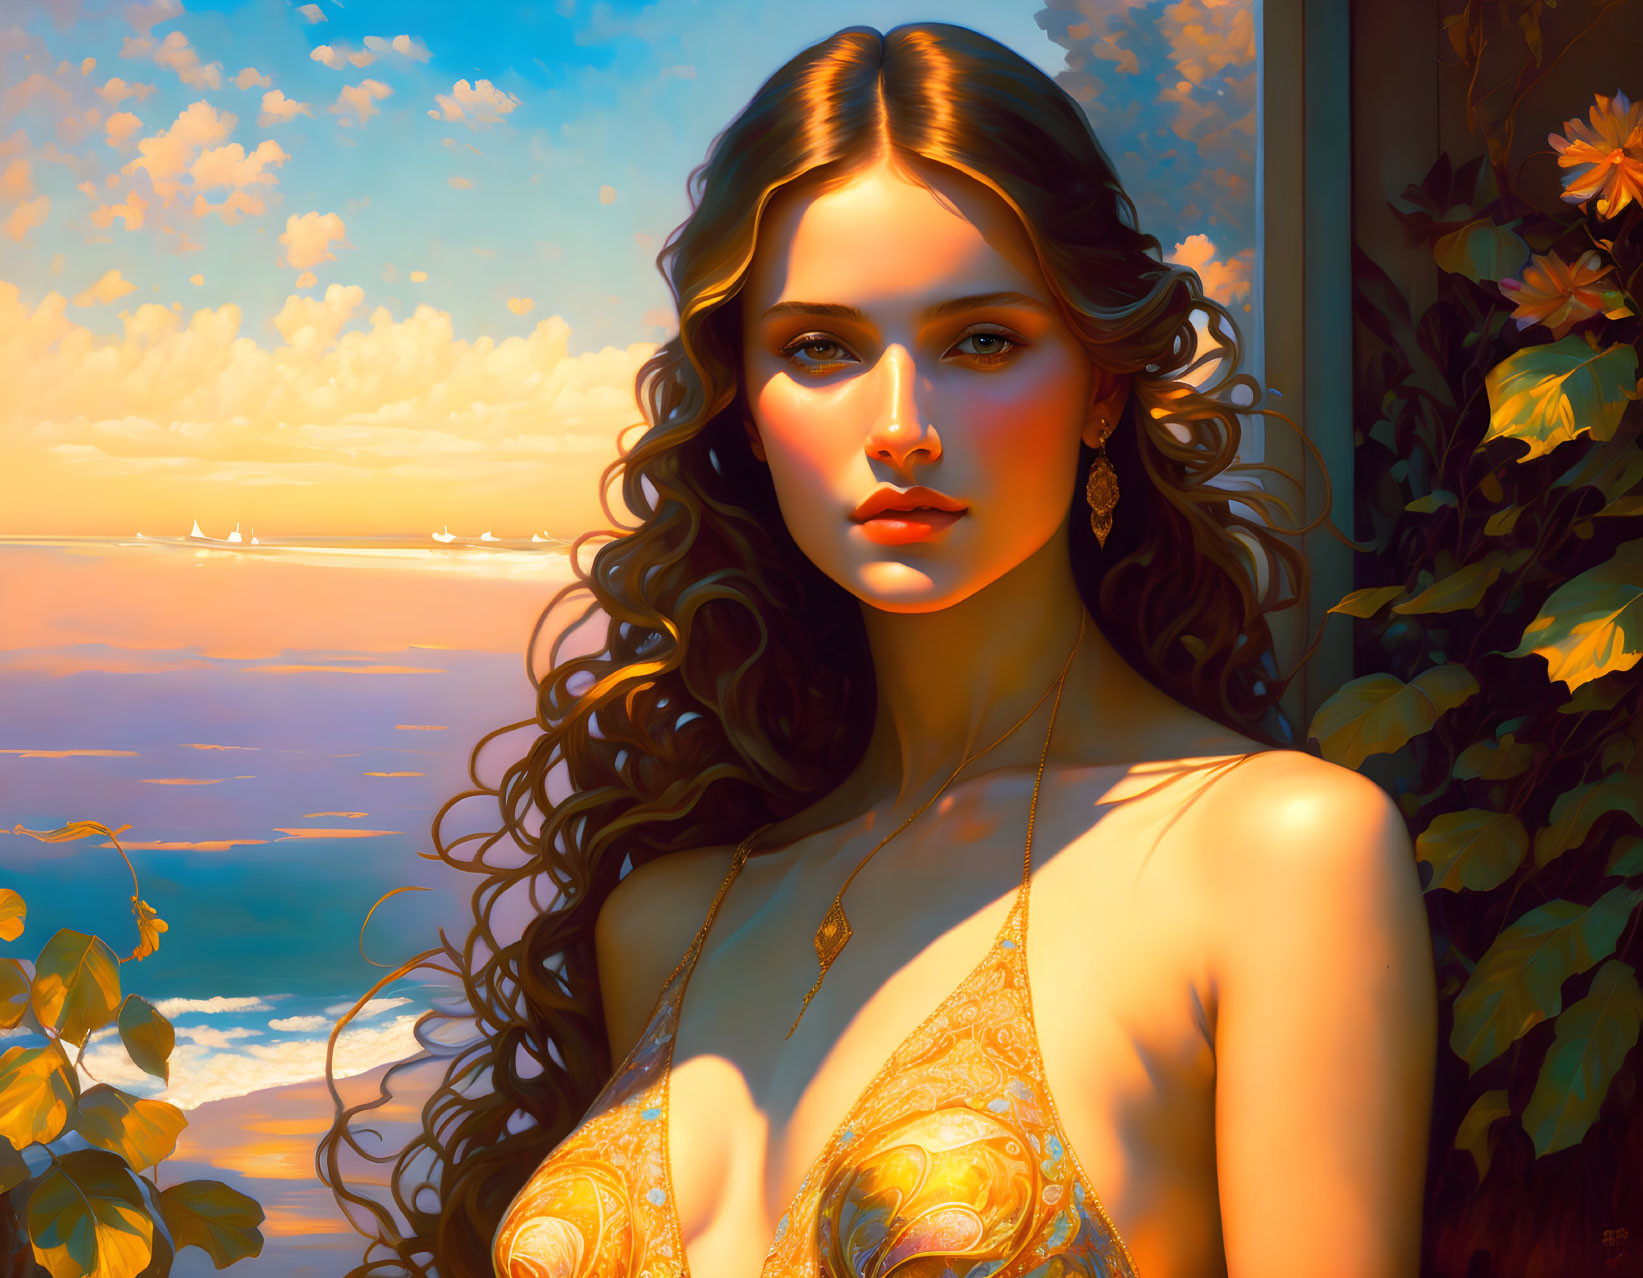 Digital portrait of woman with long brown hair, gold dress, earrings, set against sunset sky and sea